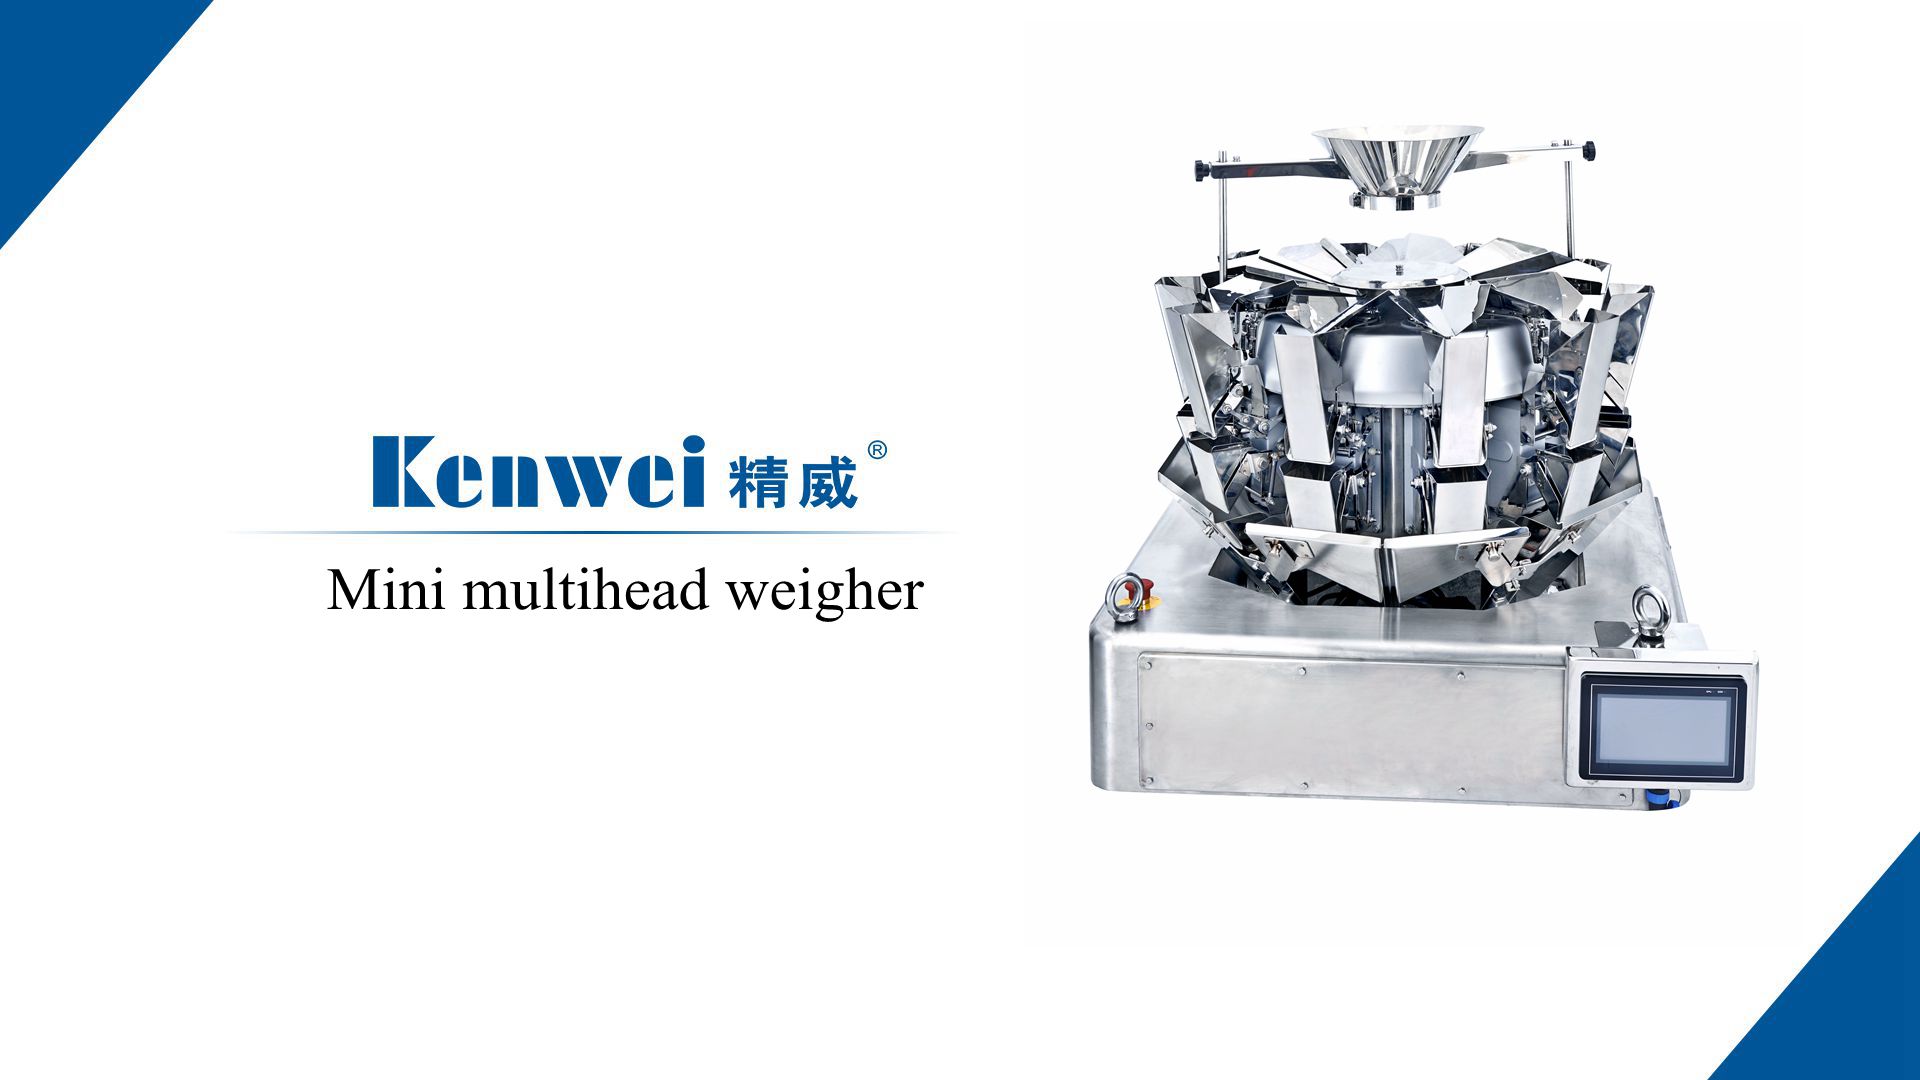 10 Head multihead weigher packing machine for weighing 10g small granules